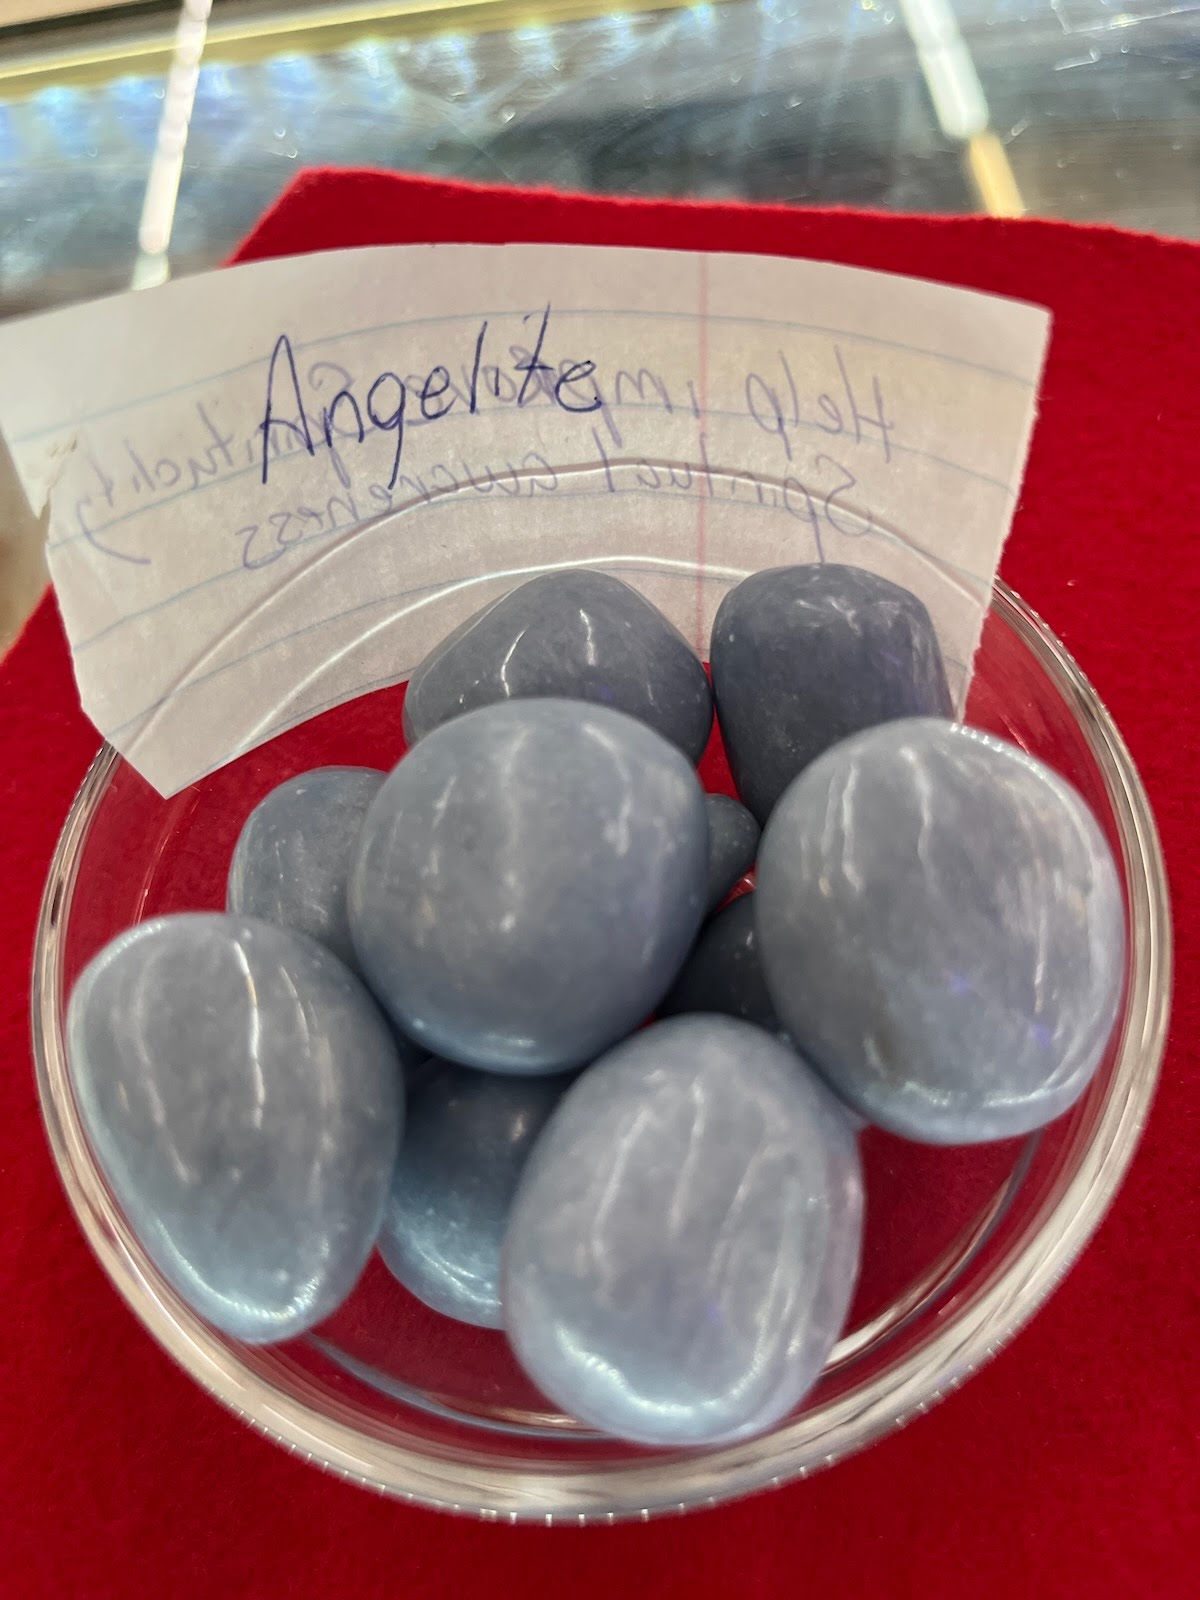 A bowl of blue stones with a note on the side.